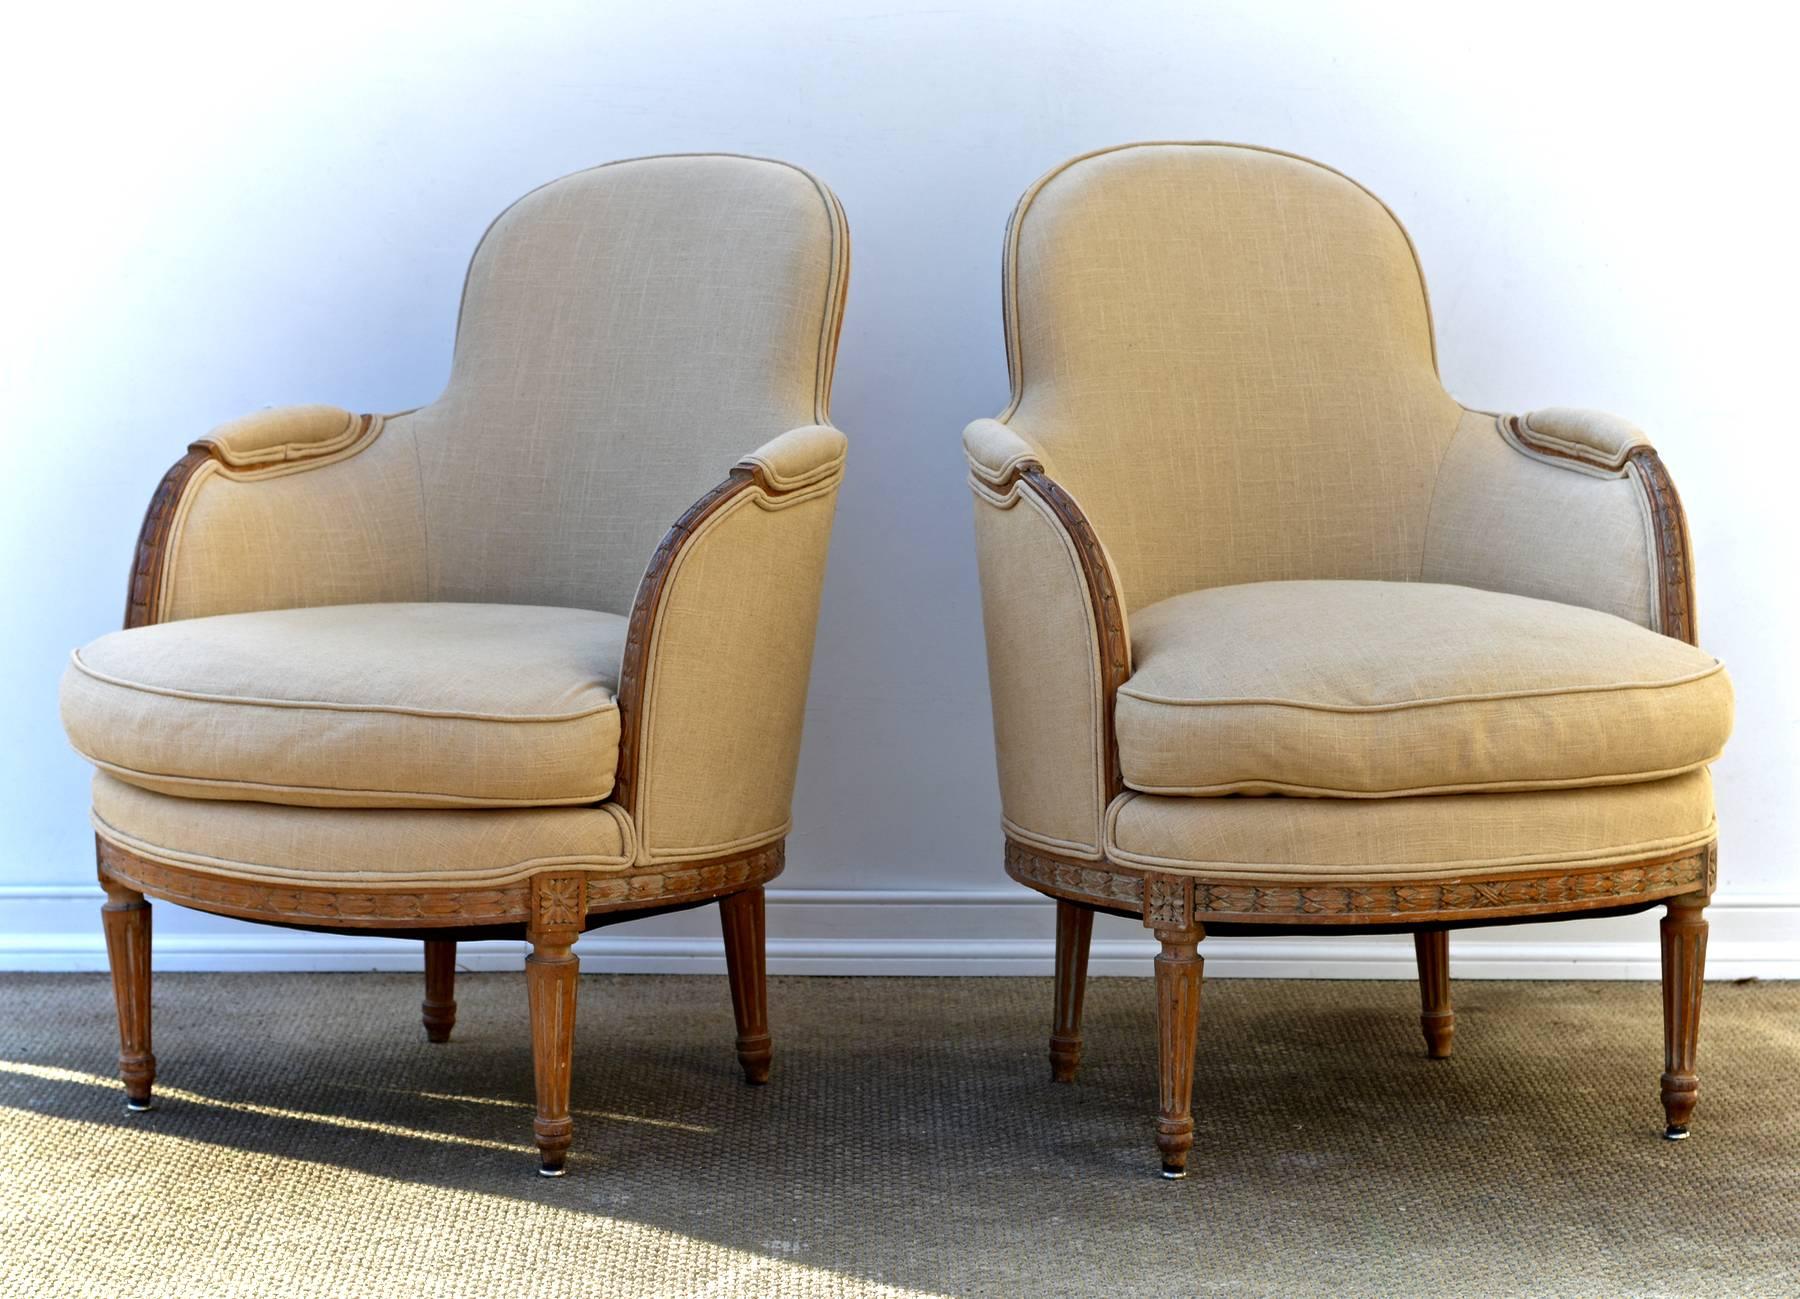 A sumptuous pair of Louis XVI style bergere chairs dressed in a supple and stunning Calvin Klein linen. The hand-carved, early 20th century chairs are tight and sit like a dream. The frames are gently pickled and show faint traces of original paint